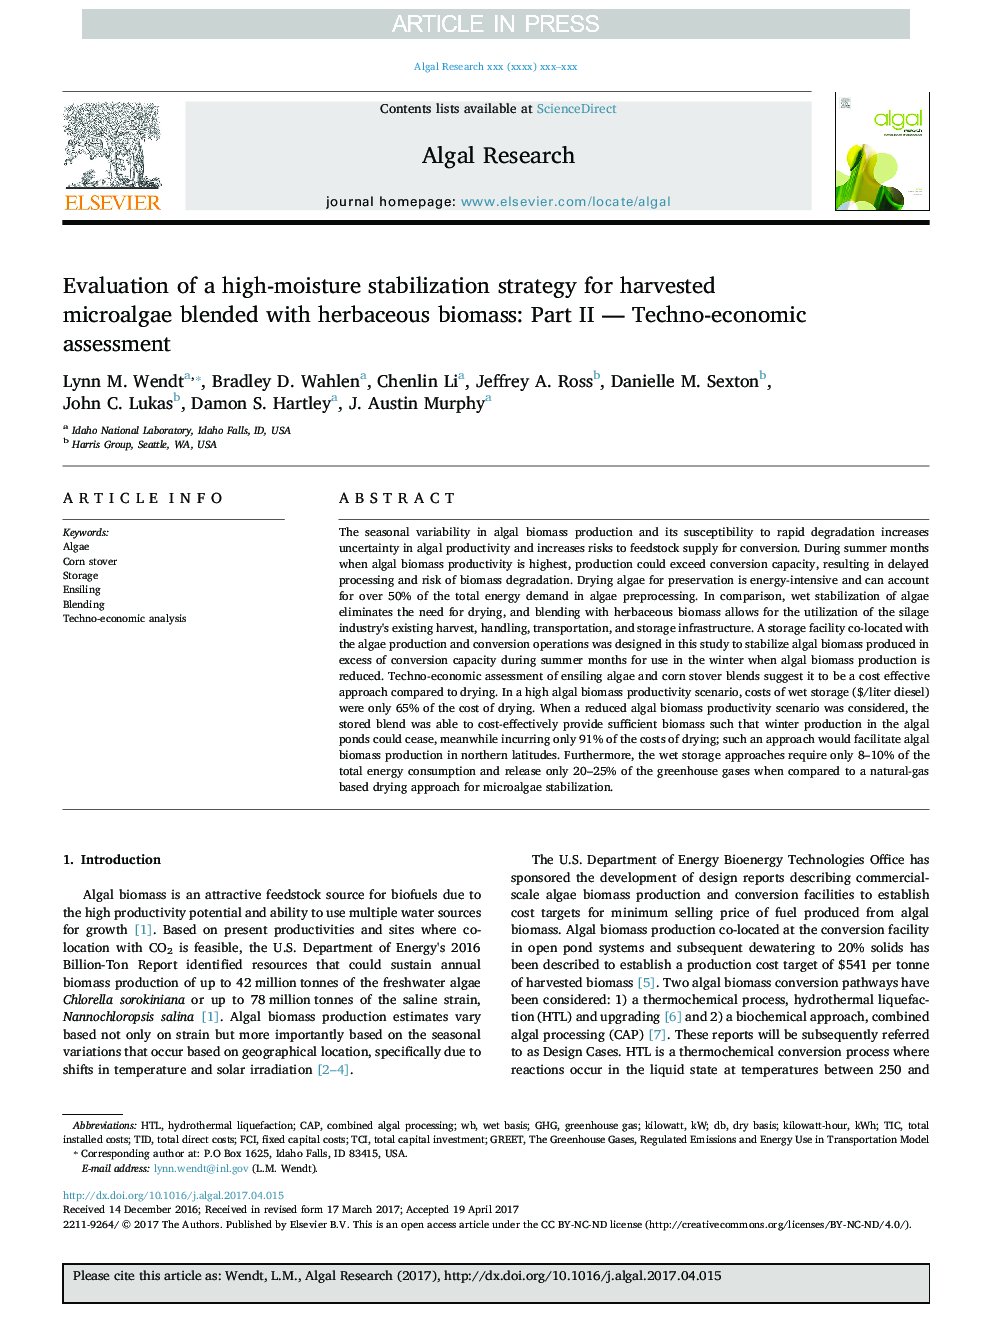 Evaluation of a high-moisture stabilization strategy for harvested microalgae blended with herbaceous biomass: Part II - Techno-economic assessment